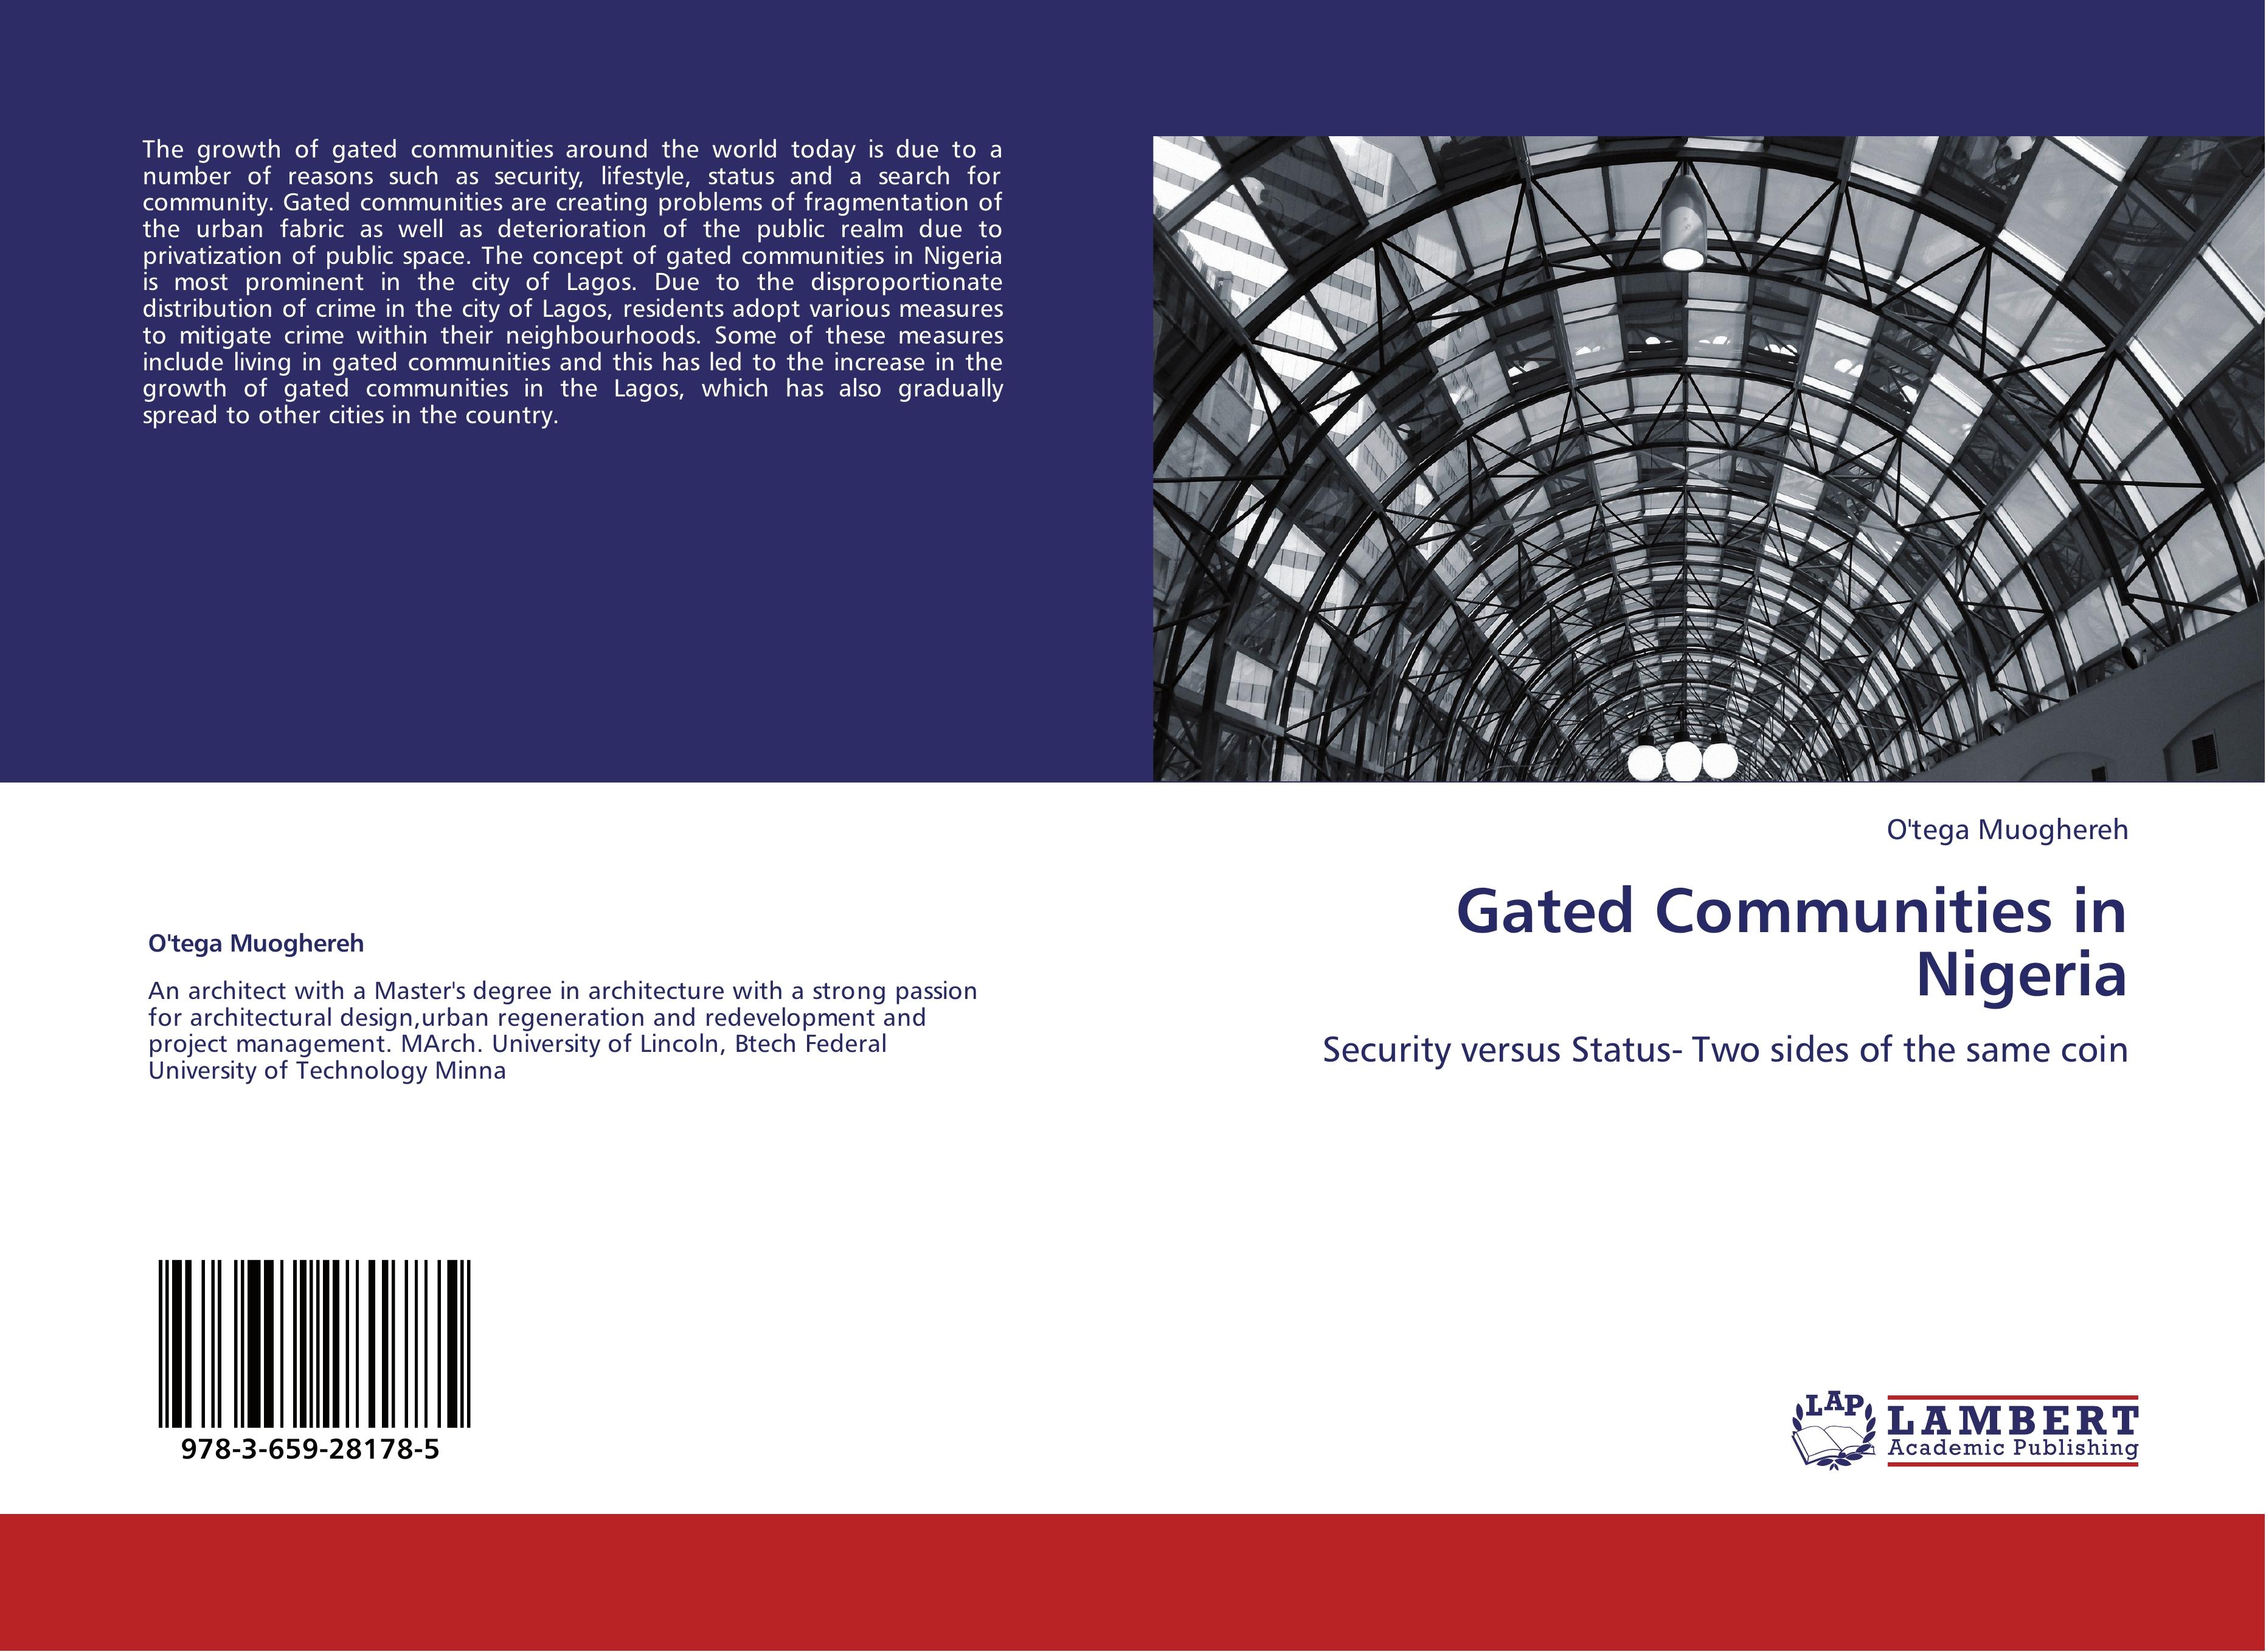 Gated Communities in Nigeria | Security versus Status- Two sides of the same coin | O'tega Muoghereh | Taschenbuch | Paperback | Englisch | 2012 | LAP LAMBERT Academic Publishing | EAN 9783659281785 - Muoghereh, O'tega